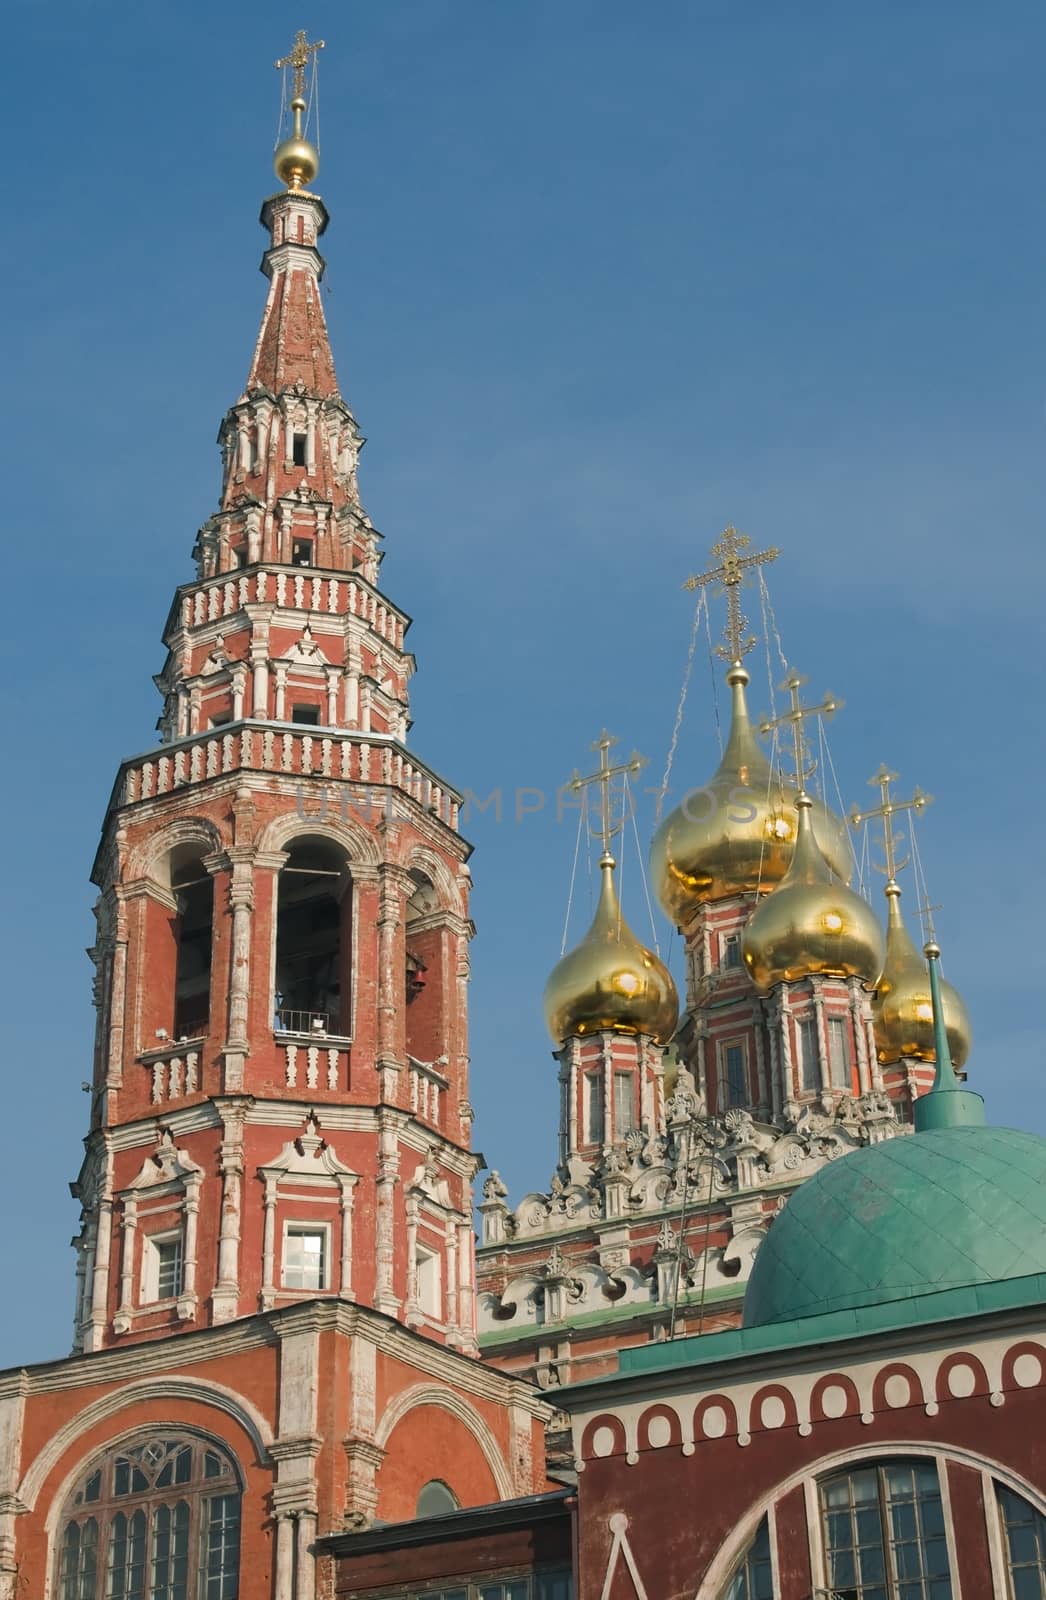 Bell Tower and the Church of the Resurrection in Kadashevsky Lane in Moscow